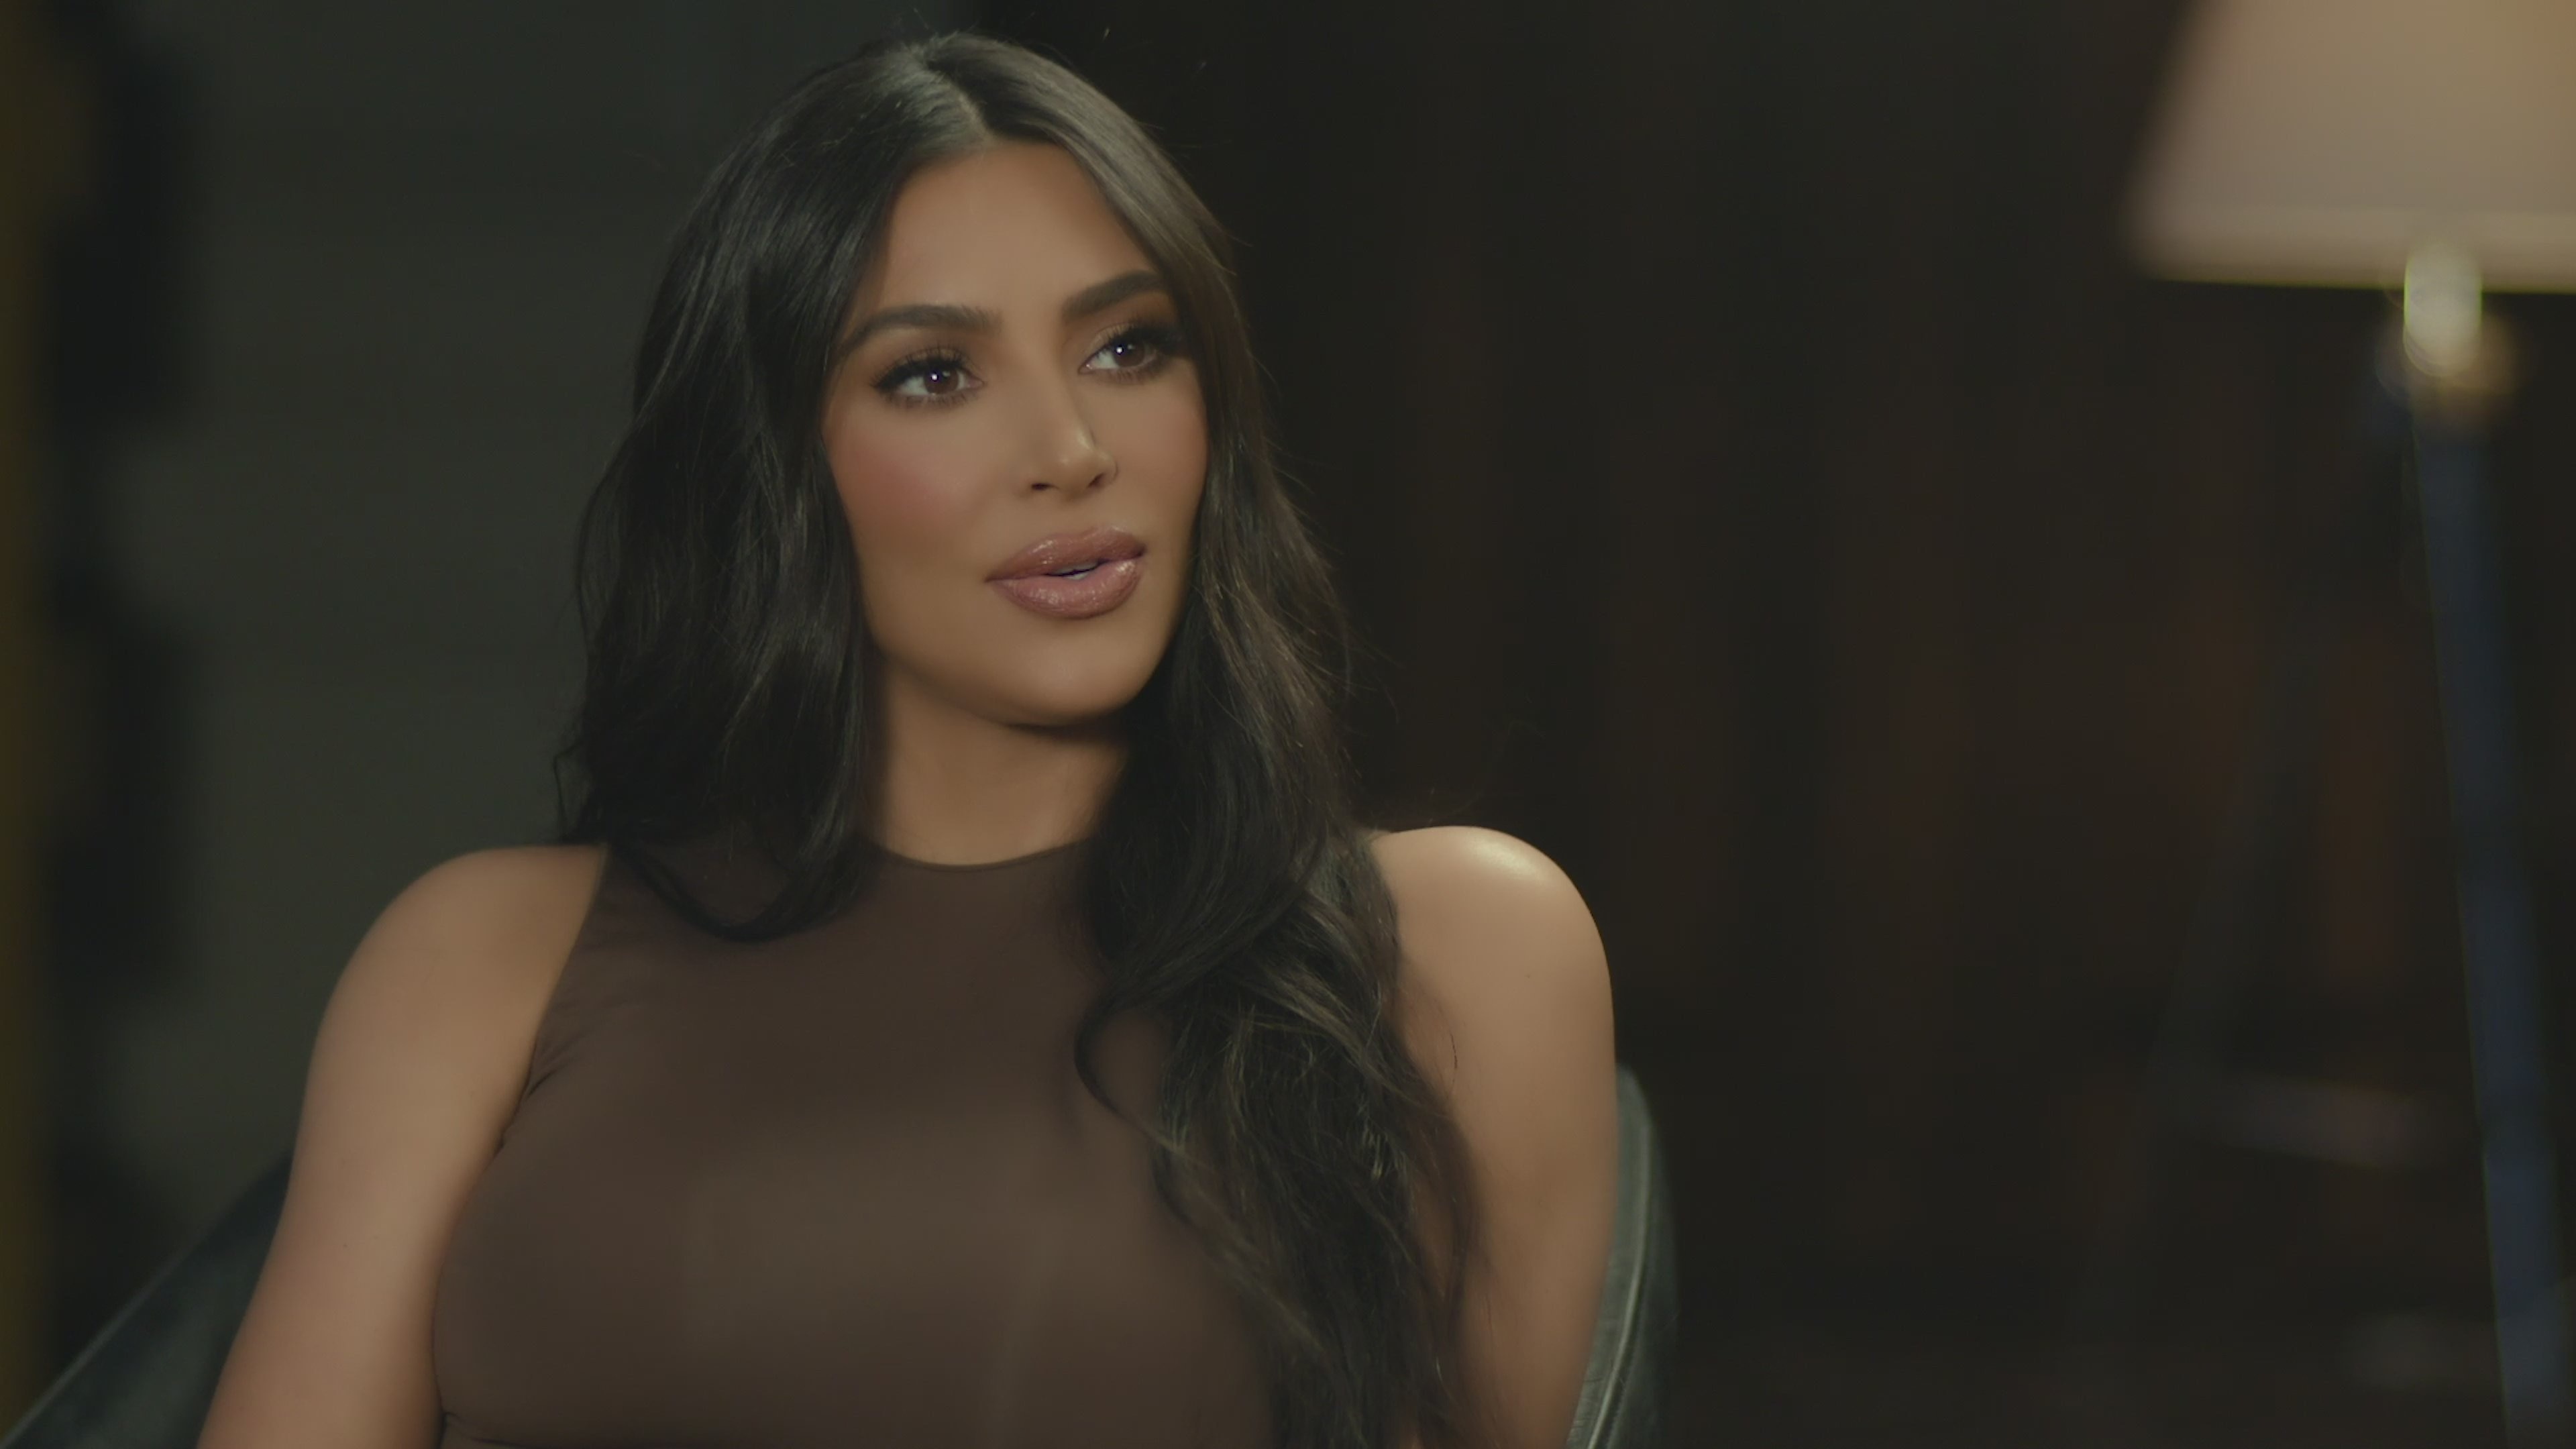 "My Life Has Changed Probably In More Ways Than I Ever Would've Imagined:" Kim Kardashian West Talks Social Justice Work